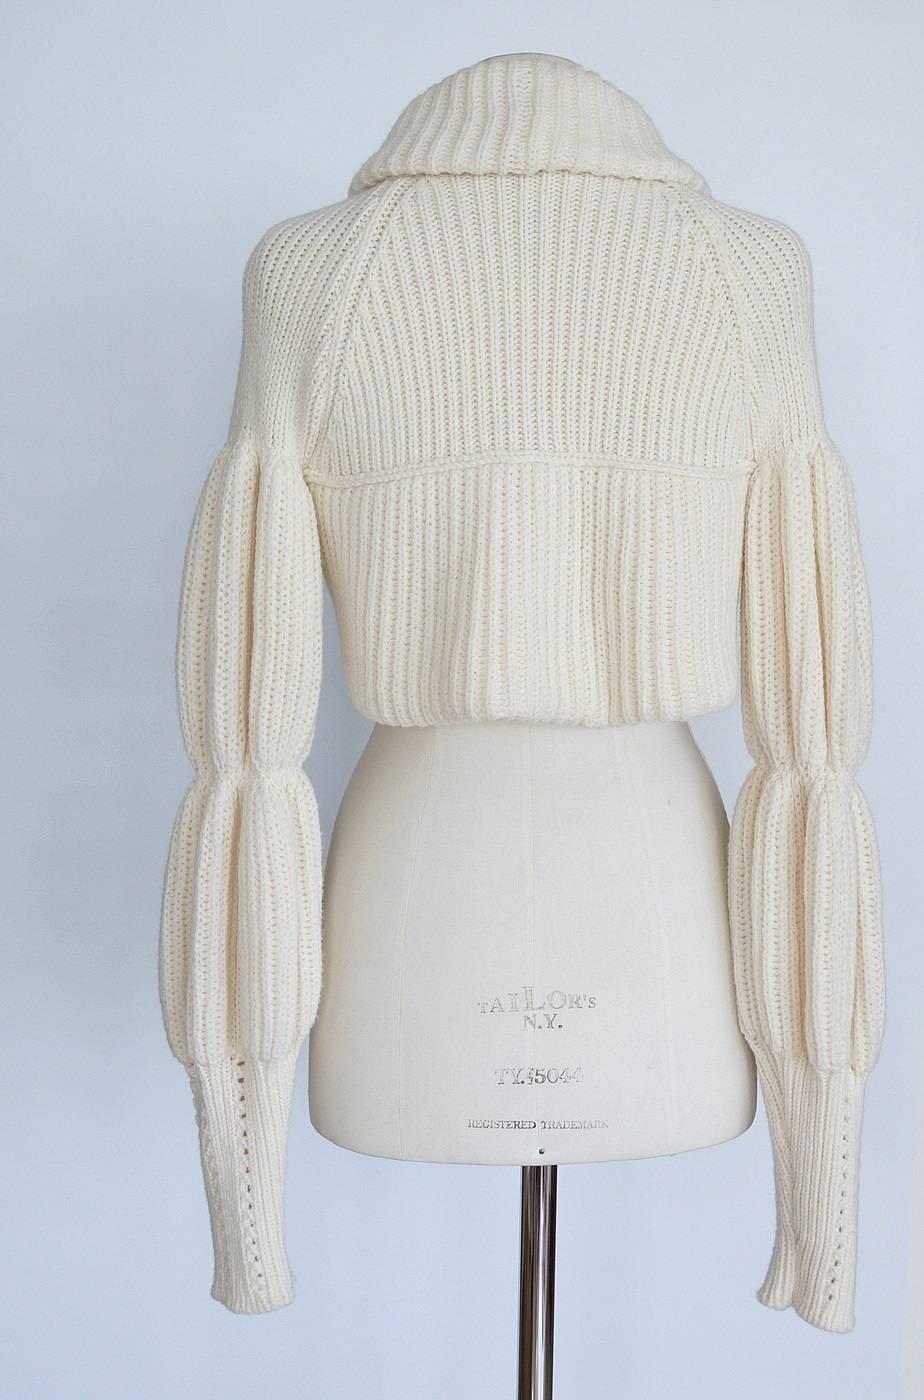 
Guaranteed authentic VALENTINO unique cardigan shrug. 
Thick ribbed knit in off white cropped cardigan shrug.
Rolled shawl collar that runs into bottom around the back.
Cut up in center of front with a single snap at front center.
Long sleeves